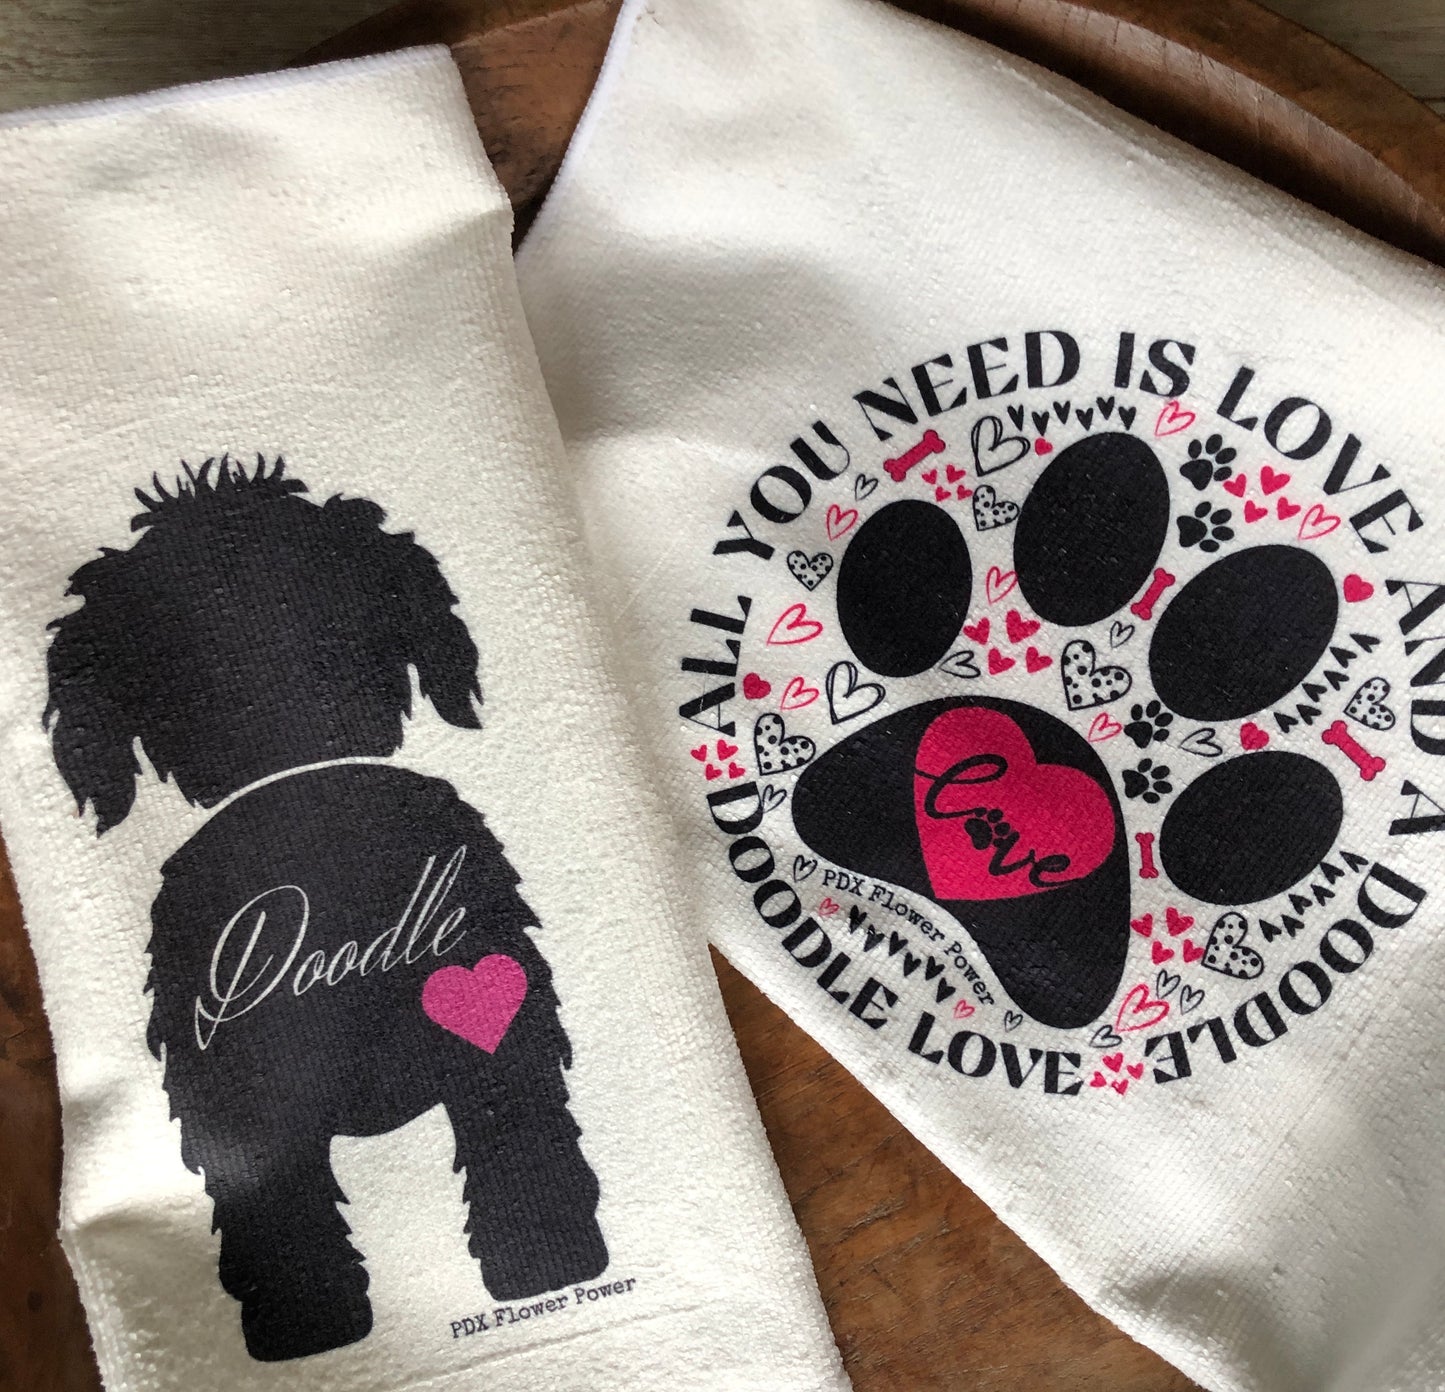 Doodle love gift set, "All you Need is Love and a Doodle/Dog " Gift set. Doodle Mom Gift, Doodle Lover gift box, Valentine doodle gift box.